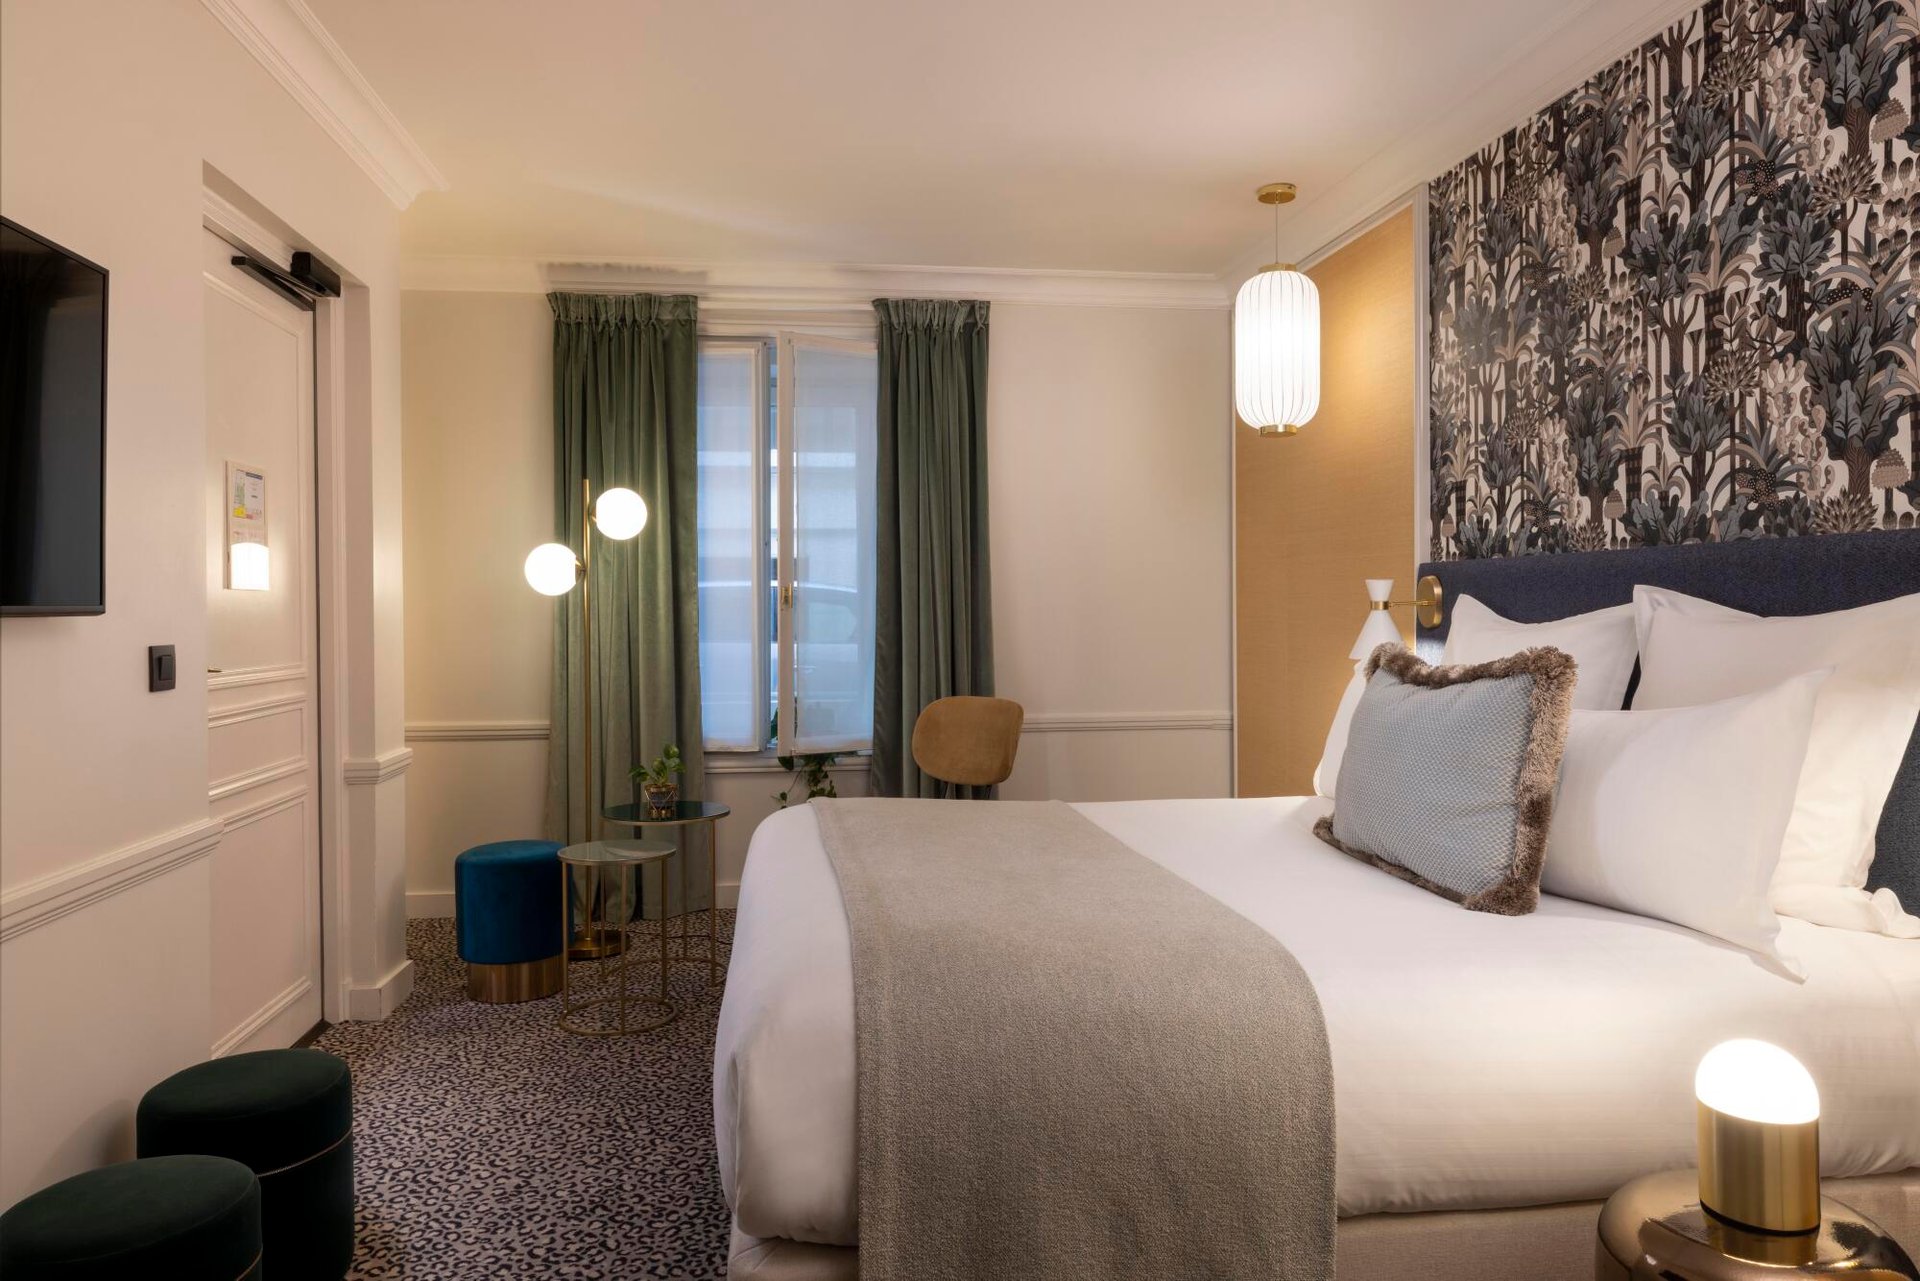 The Cosy bedroom at Hotel Gramont, close to the Paris Opera Garnier, is a nice and large single room, accessible for persons with reduced mobility.